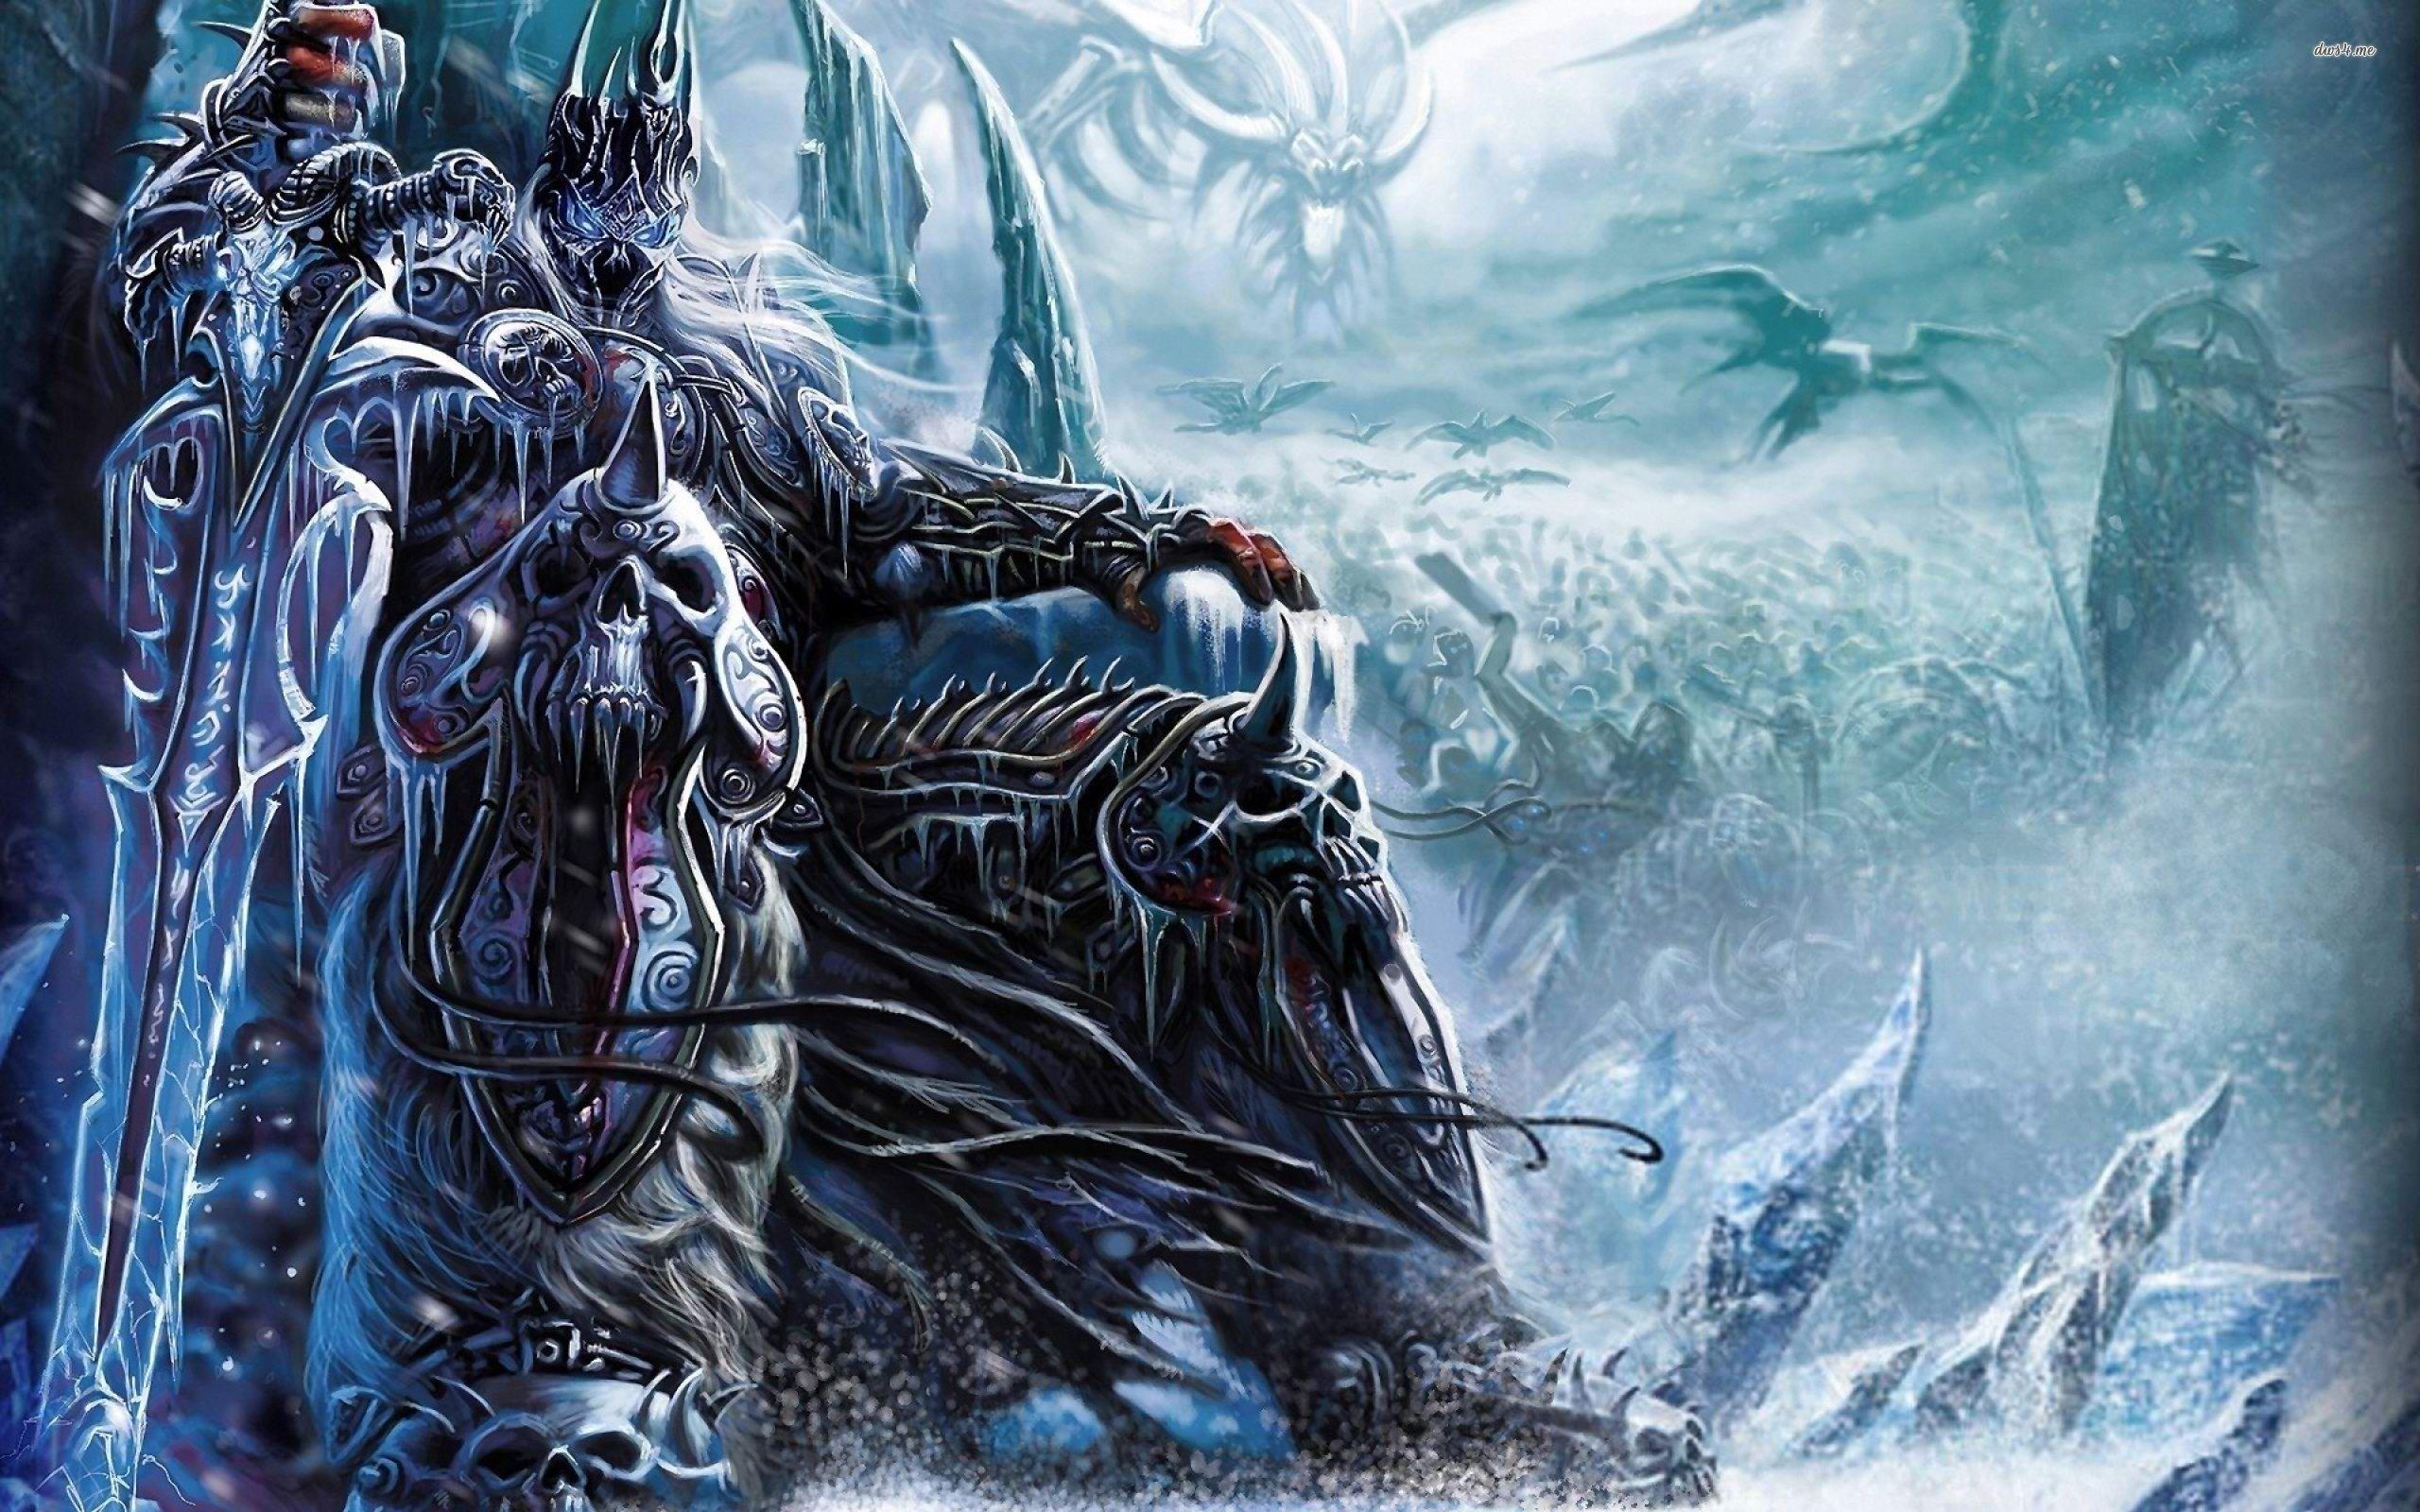 Lich King of Warcraft of the Lich King wallpaper